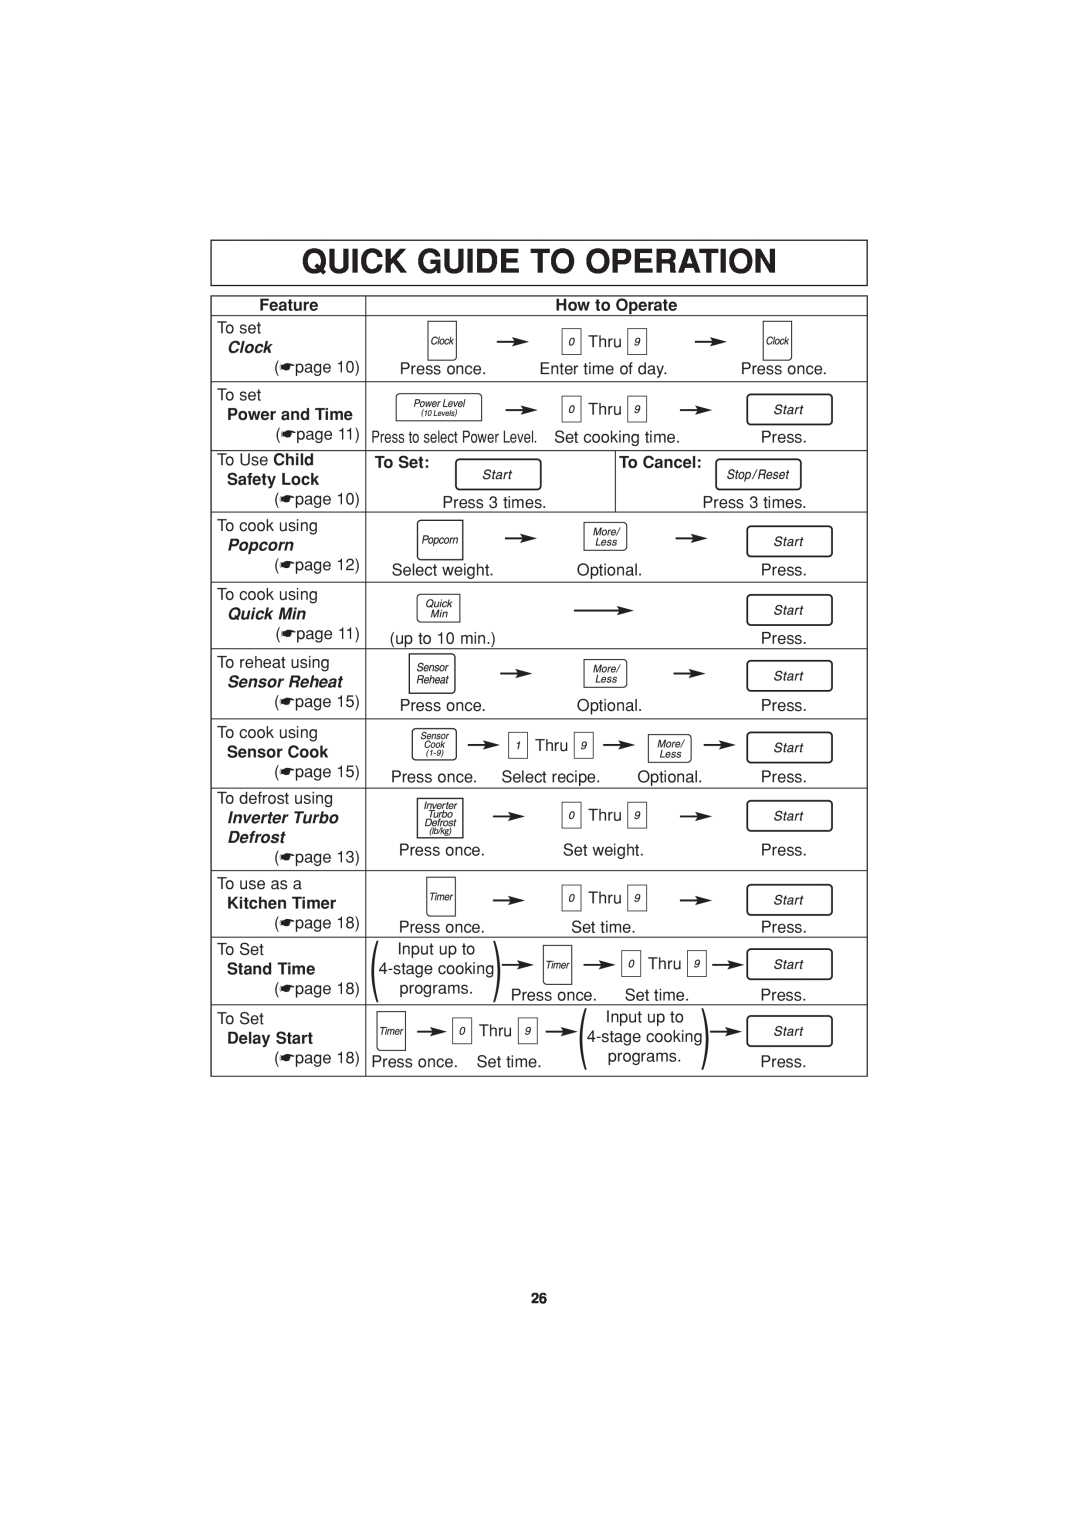 Panasonic NN-H624 Quick Guide To Operation, Feature, How to Operate, Clock, Power and Time, To Set, To Cancel, Safety Lock 